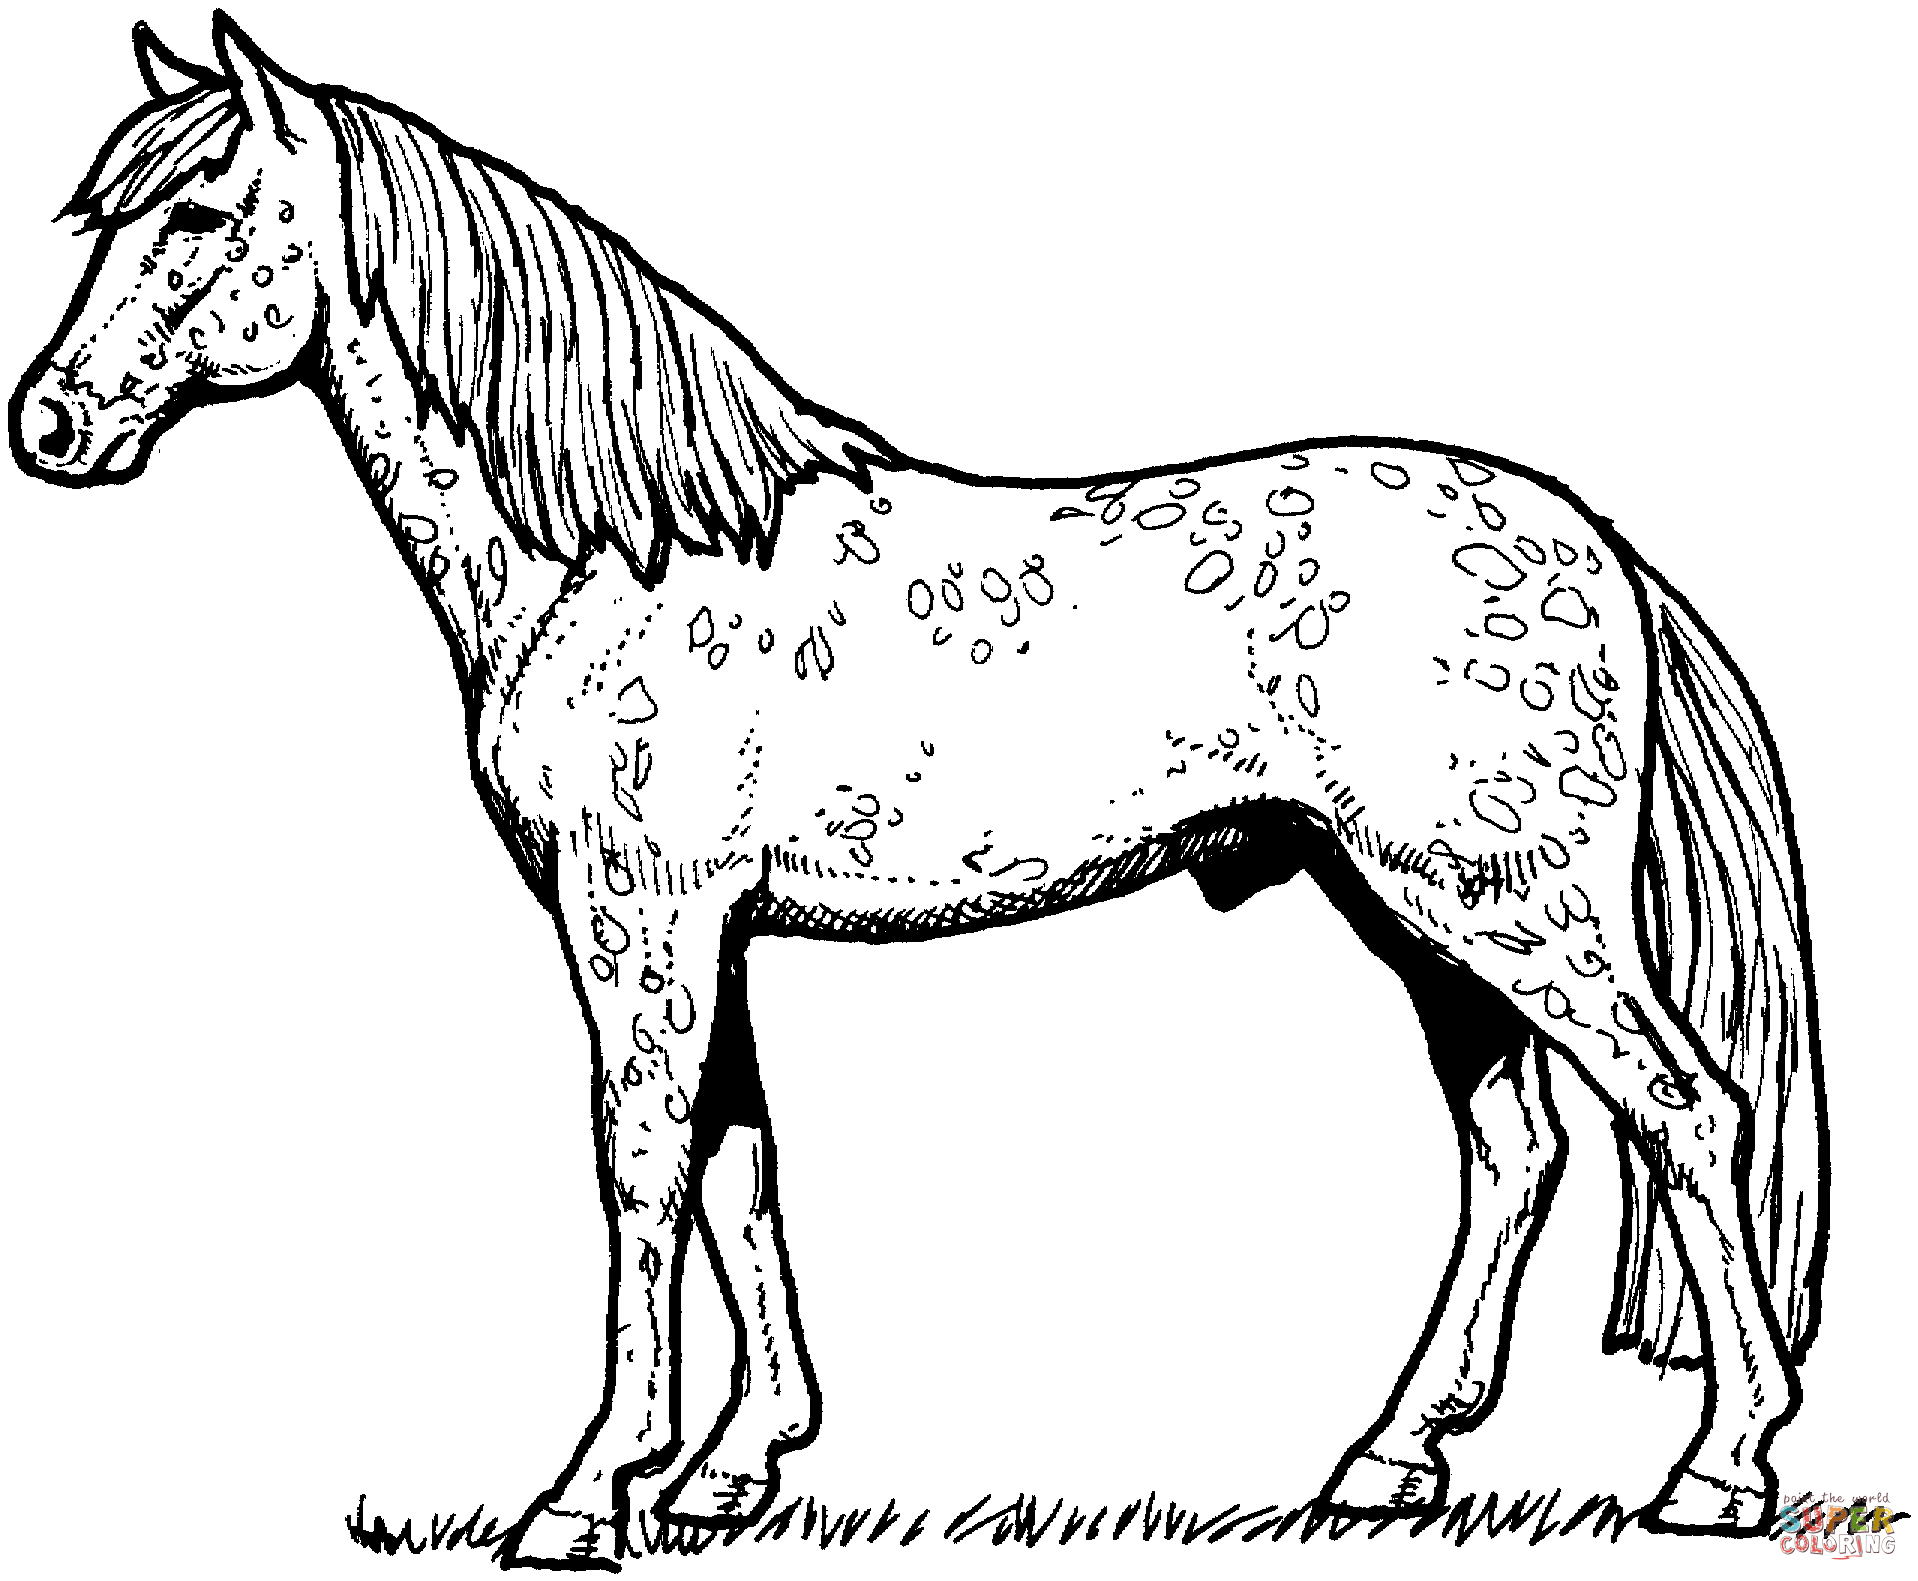 Horses coloring pages | Free Coloring Pages